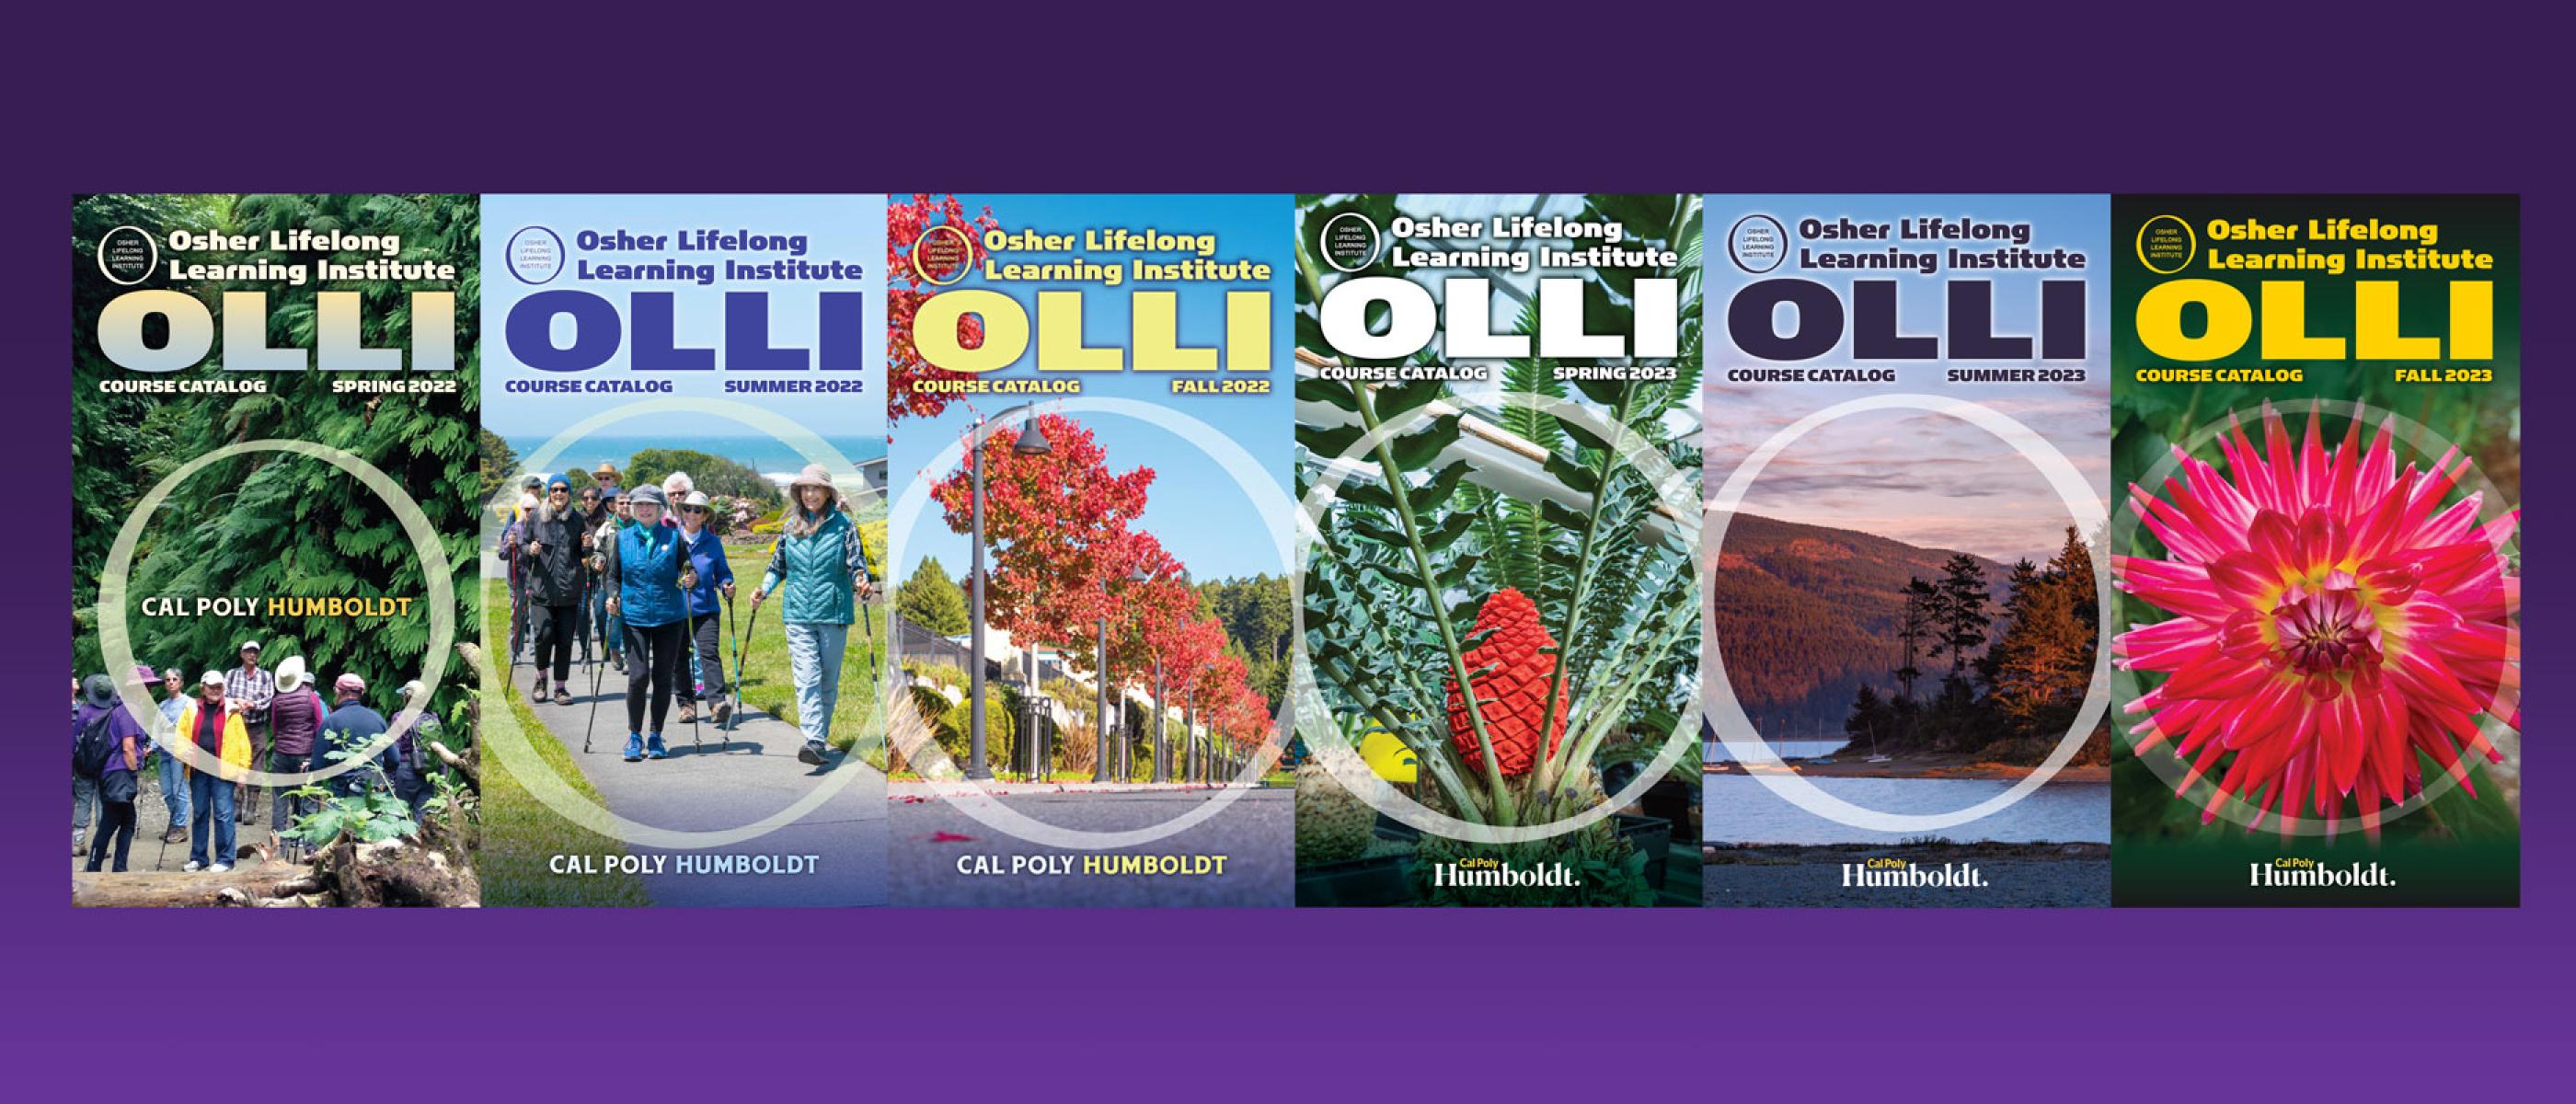 Covers of OLLI course catalogs